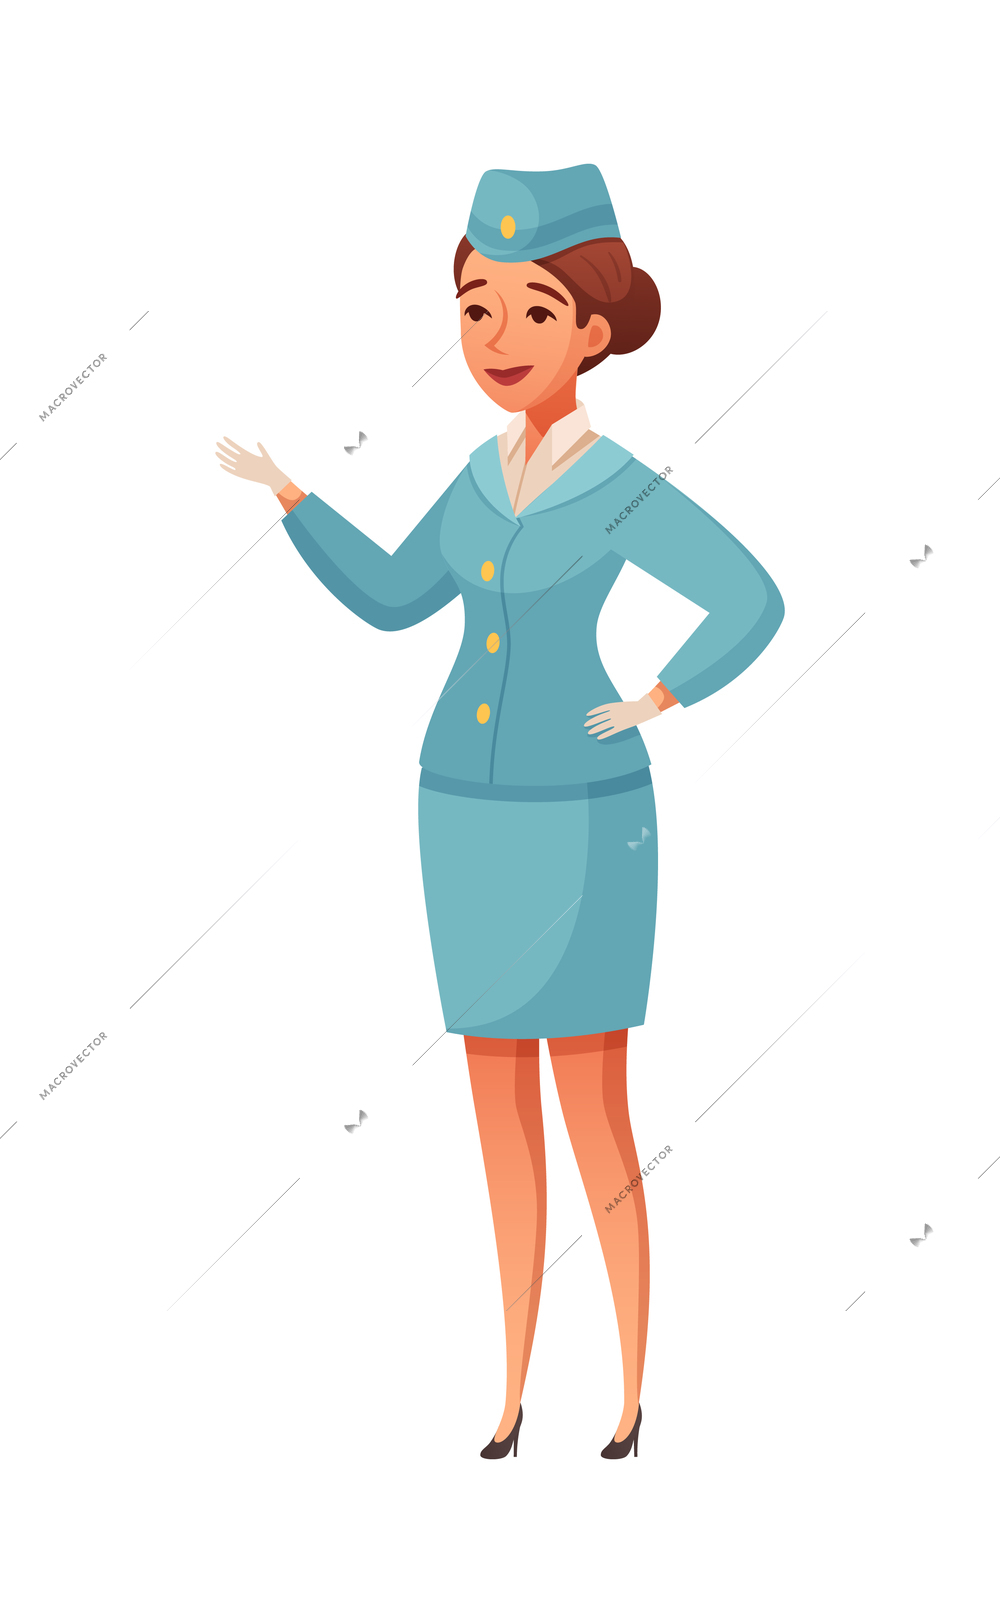 Aircraft plane airport staff people cartoon composition with female character of steward in uniform with gloves vector illustration